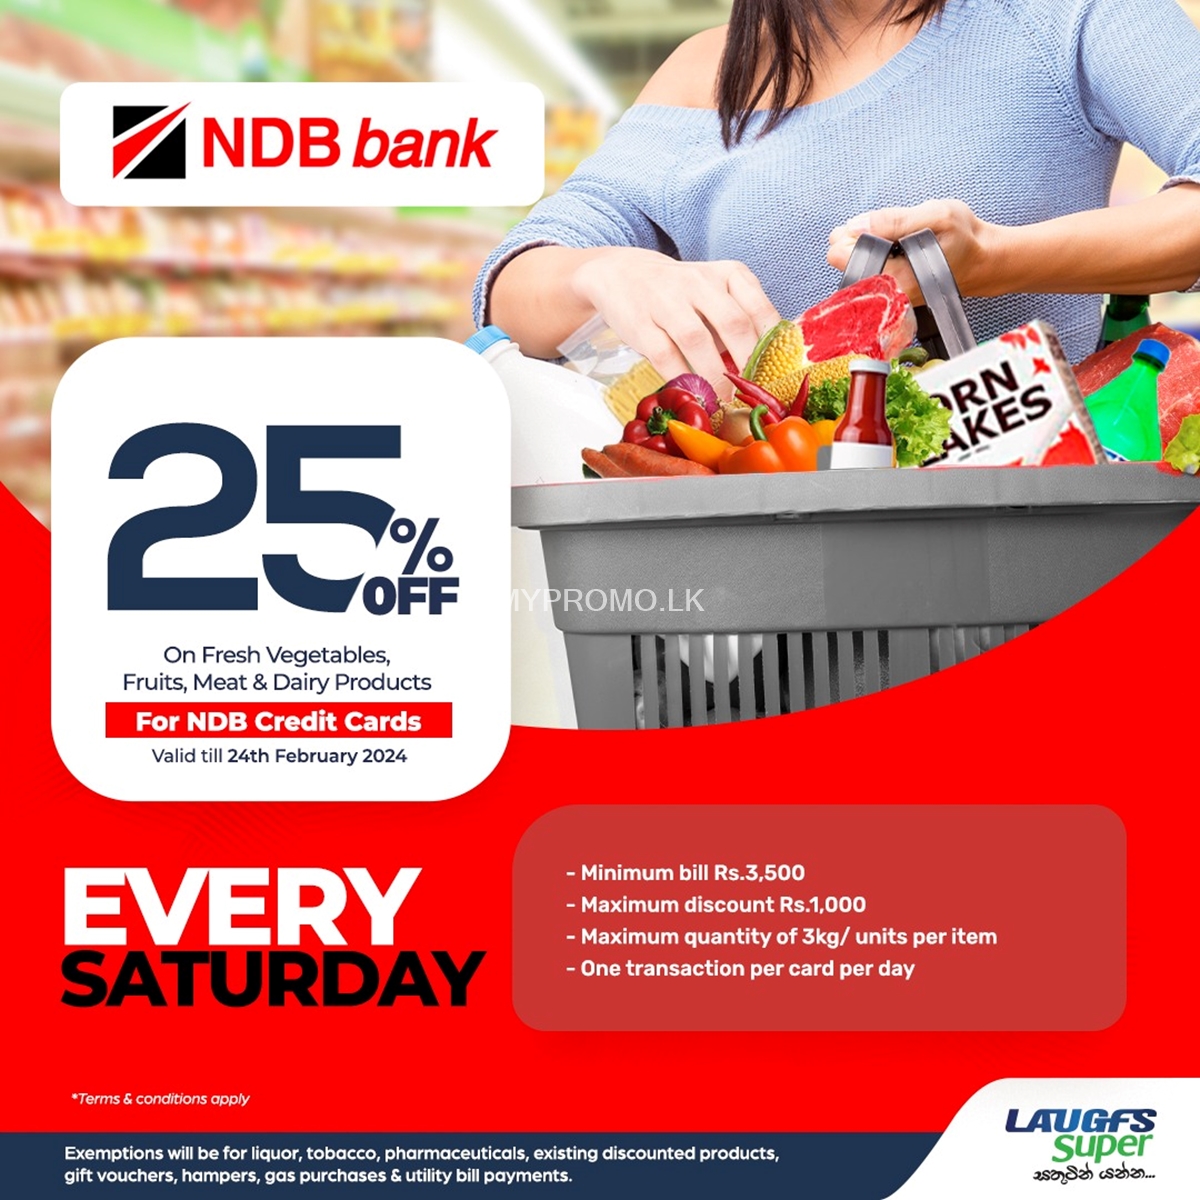 25% off on Fresh Vegetables, fruits, Meat & Dairy Products at LAUGFS Supermarket for NDB Credit cards